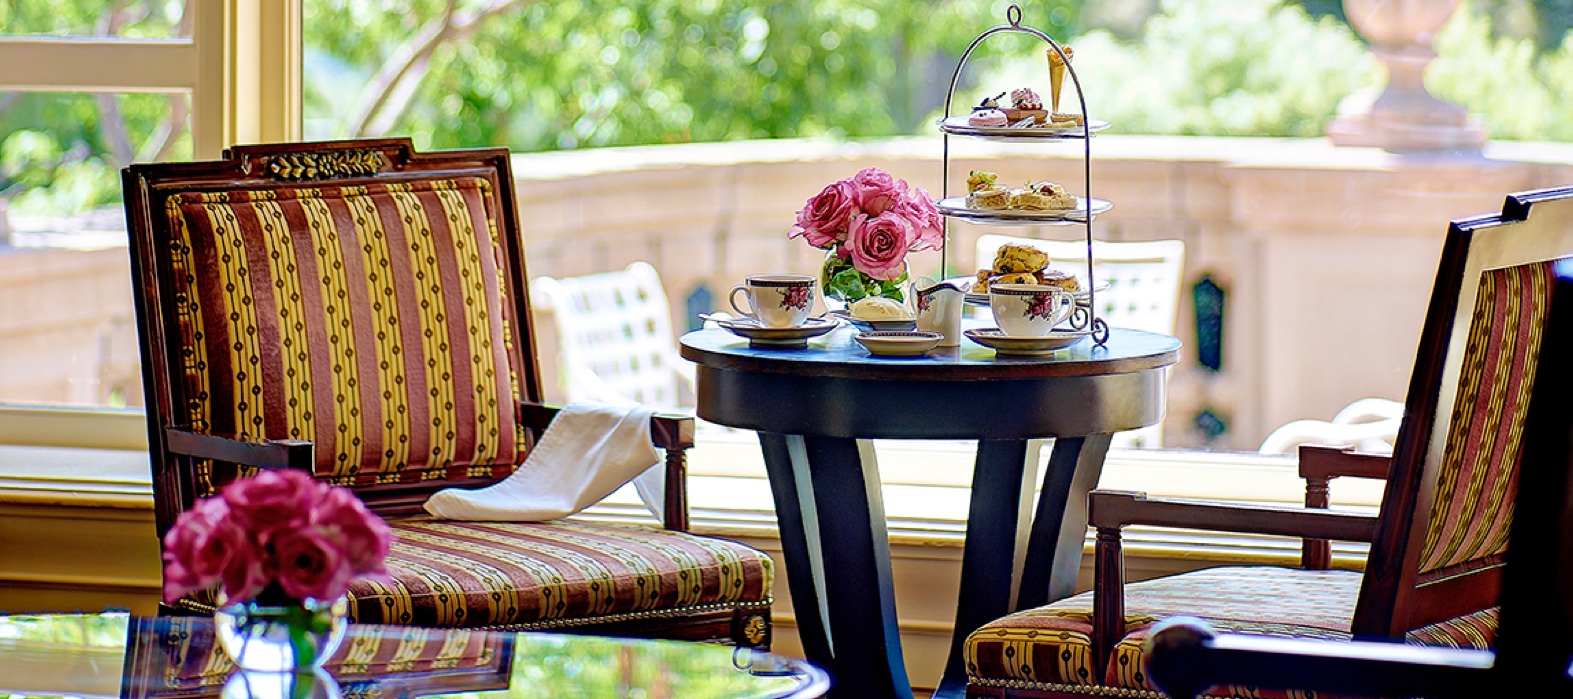 A signature of ab88kai brand, ab88kai Afternoon Tea offers fluffy scones, tea sandwiches and fine pastries.